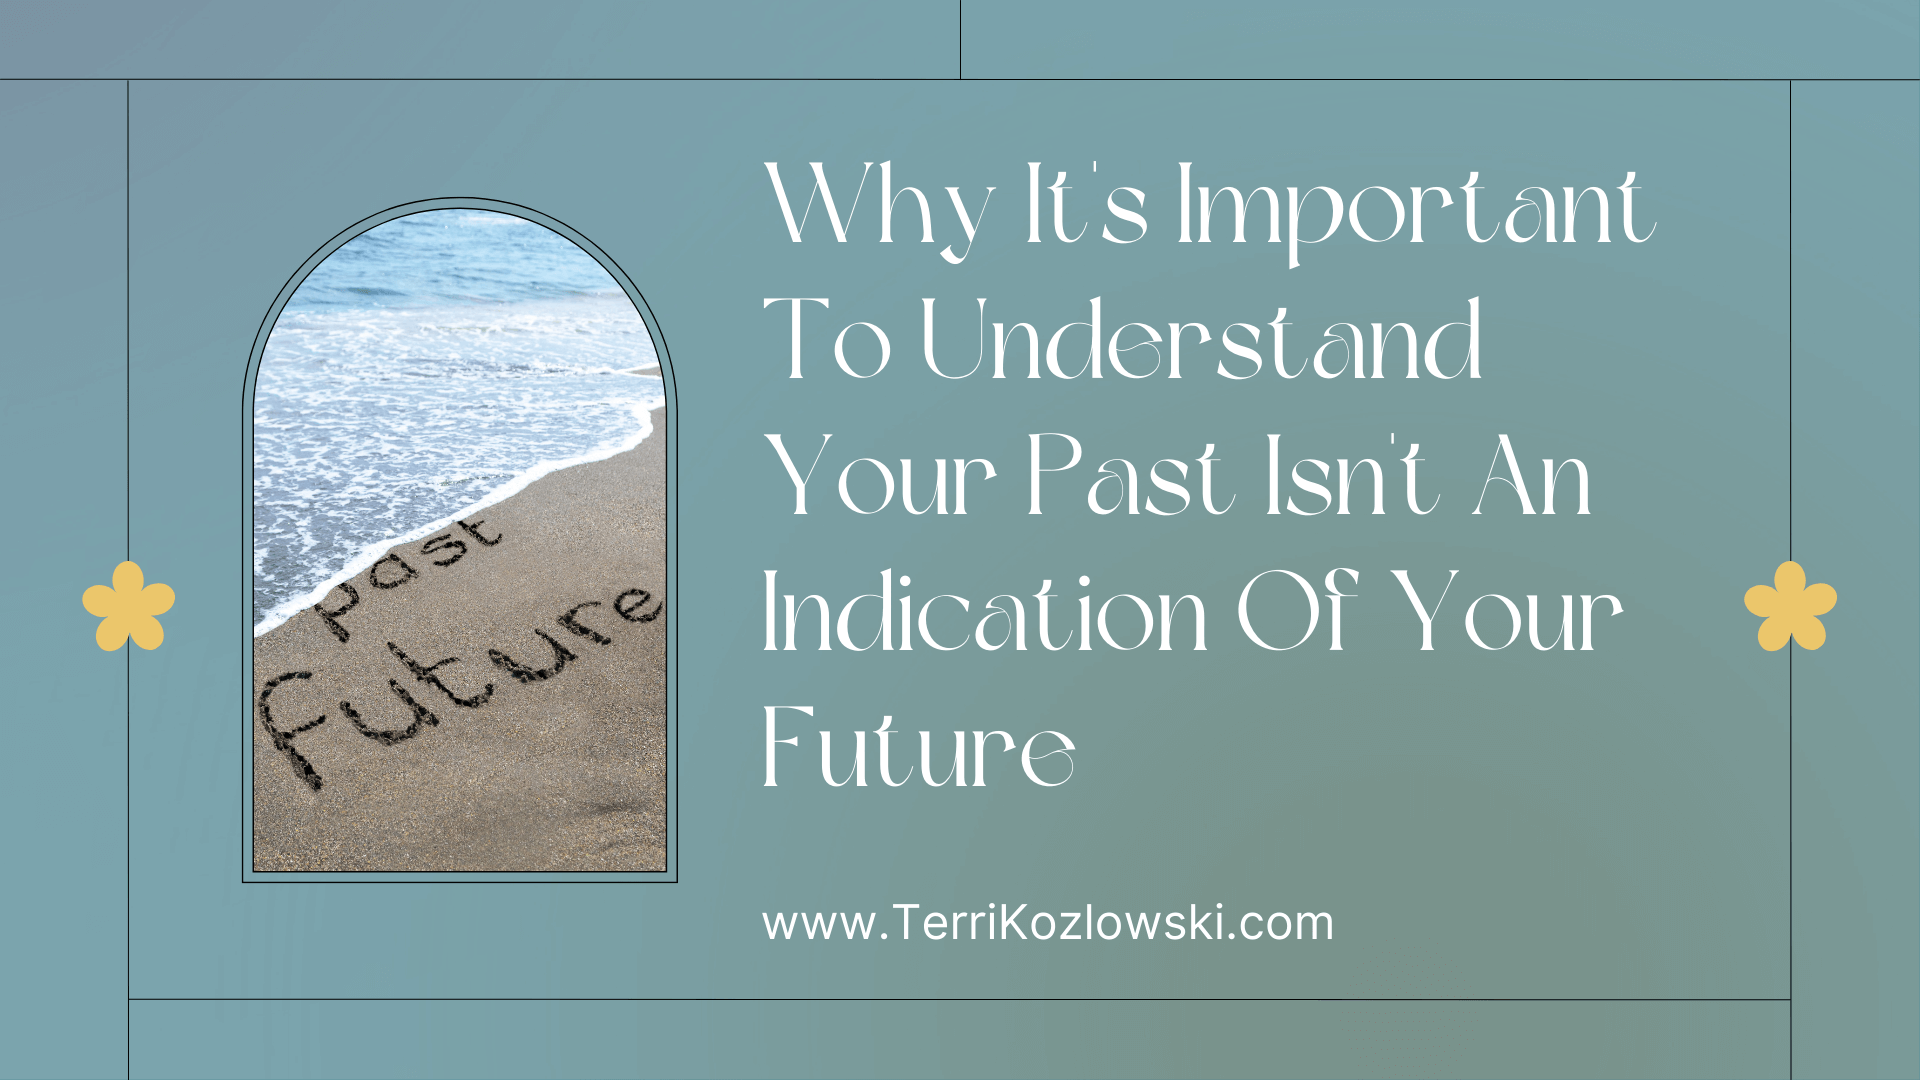 Why It's Important To Understand Your Past Isn't An Indication Of Your Future